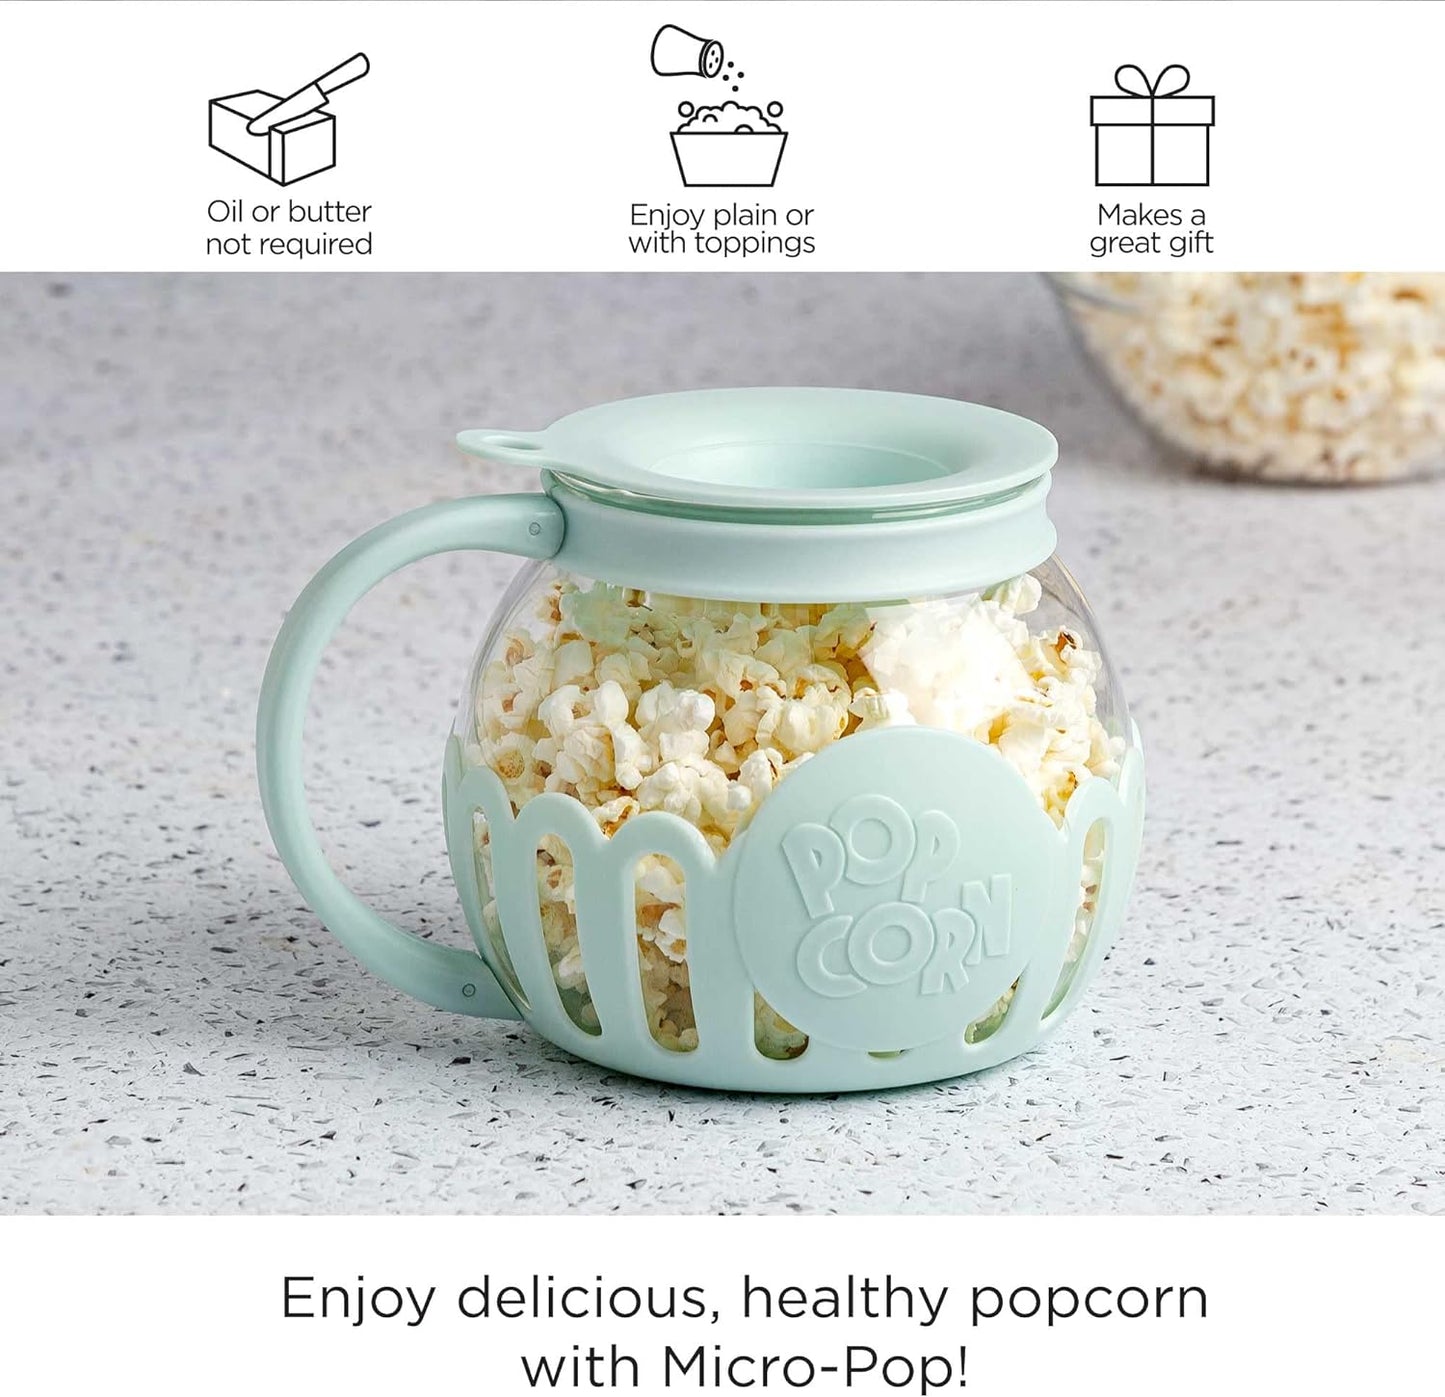 Micro-Pop Microwave Popcorn Popper with Temperature Safe Glass, 3-In-1 Lid Measures Kernels and Melts Butter, Made without BPA, Dishwasher Safe, 1.5-Quart, Aqua